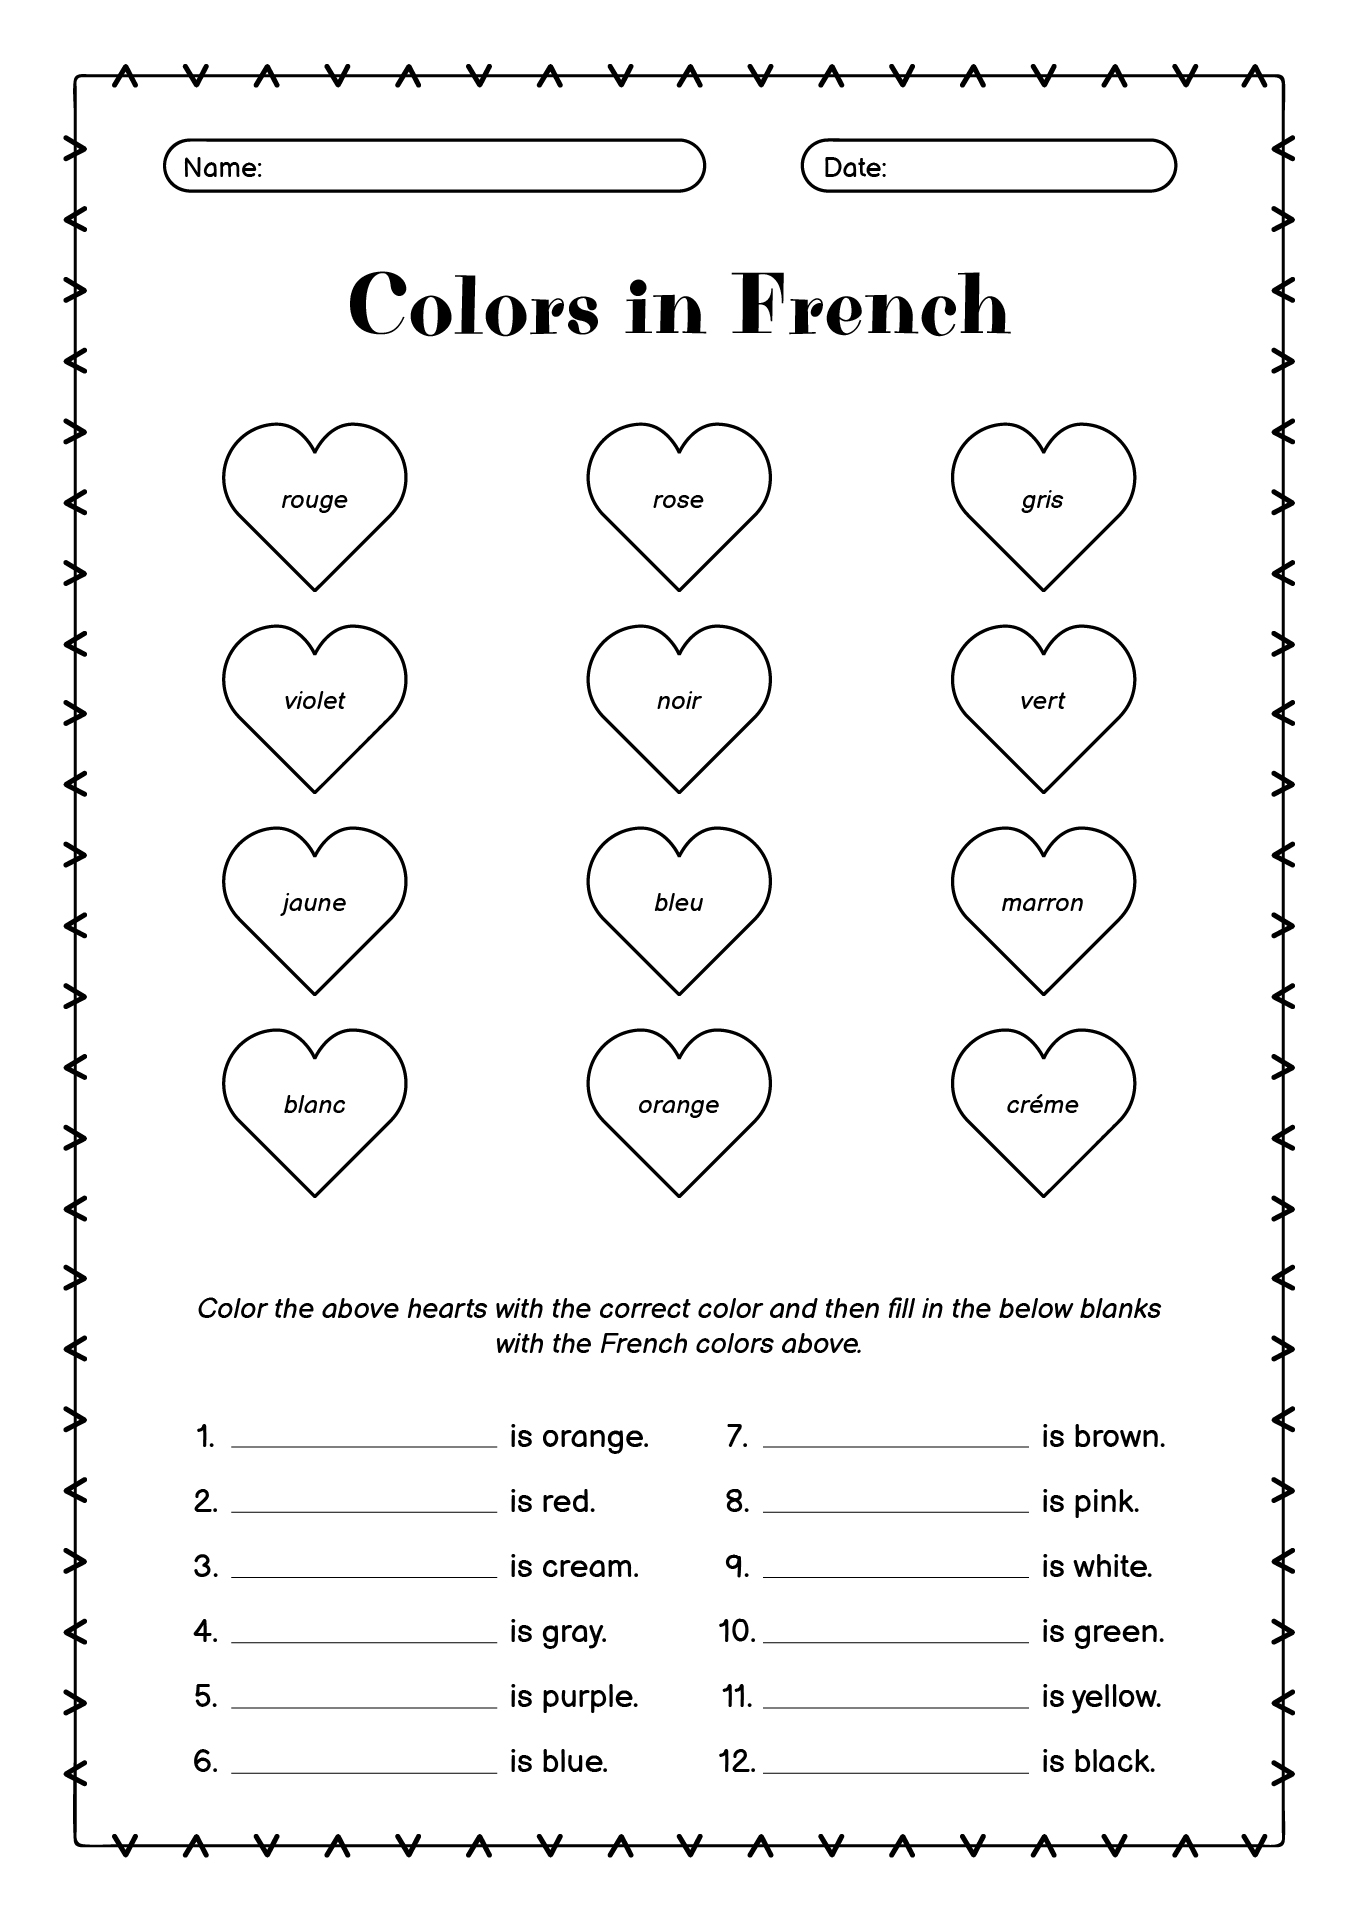 Printable French Colors Vocabulary Worksheet